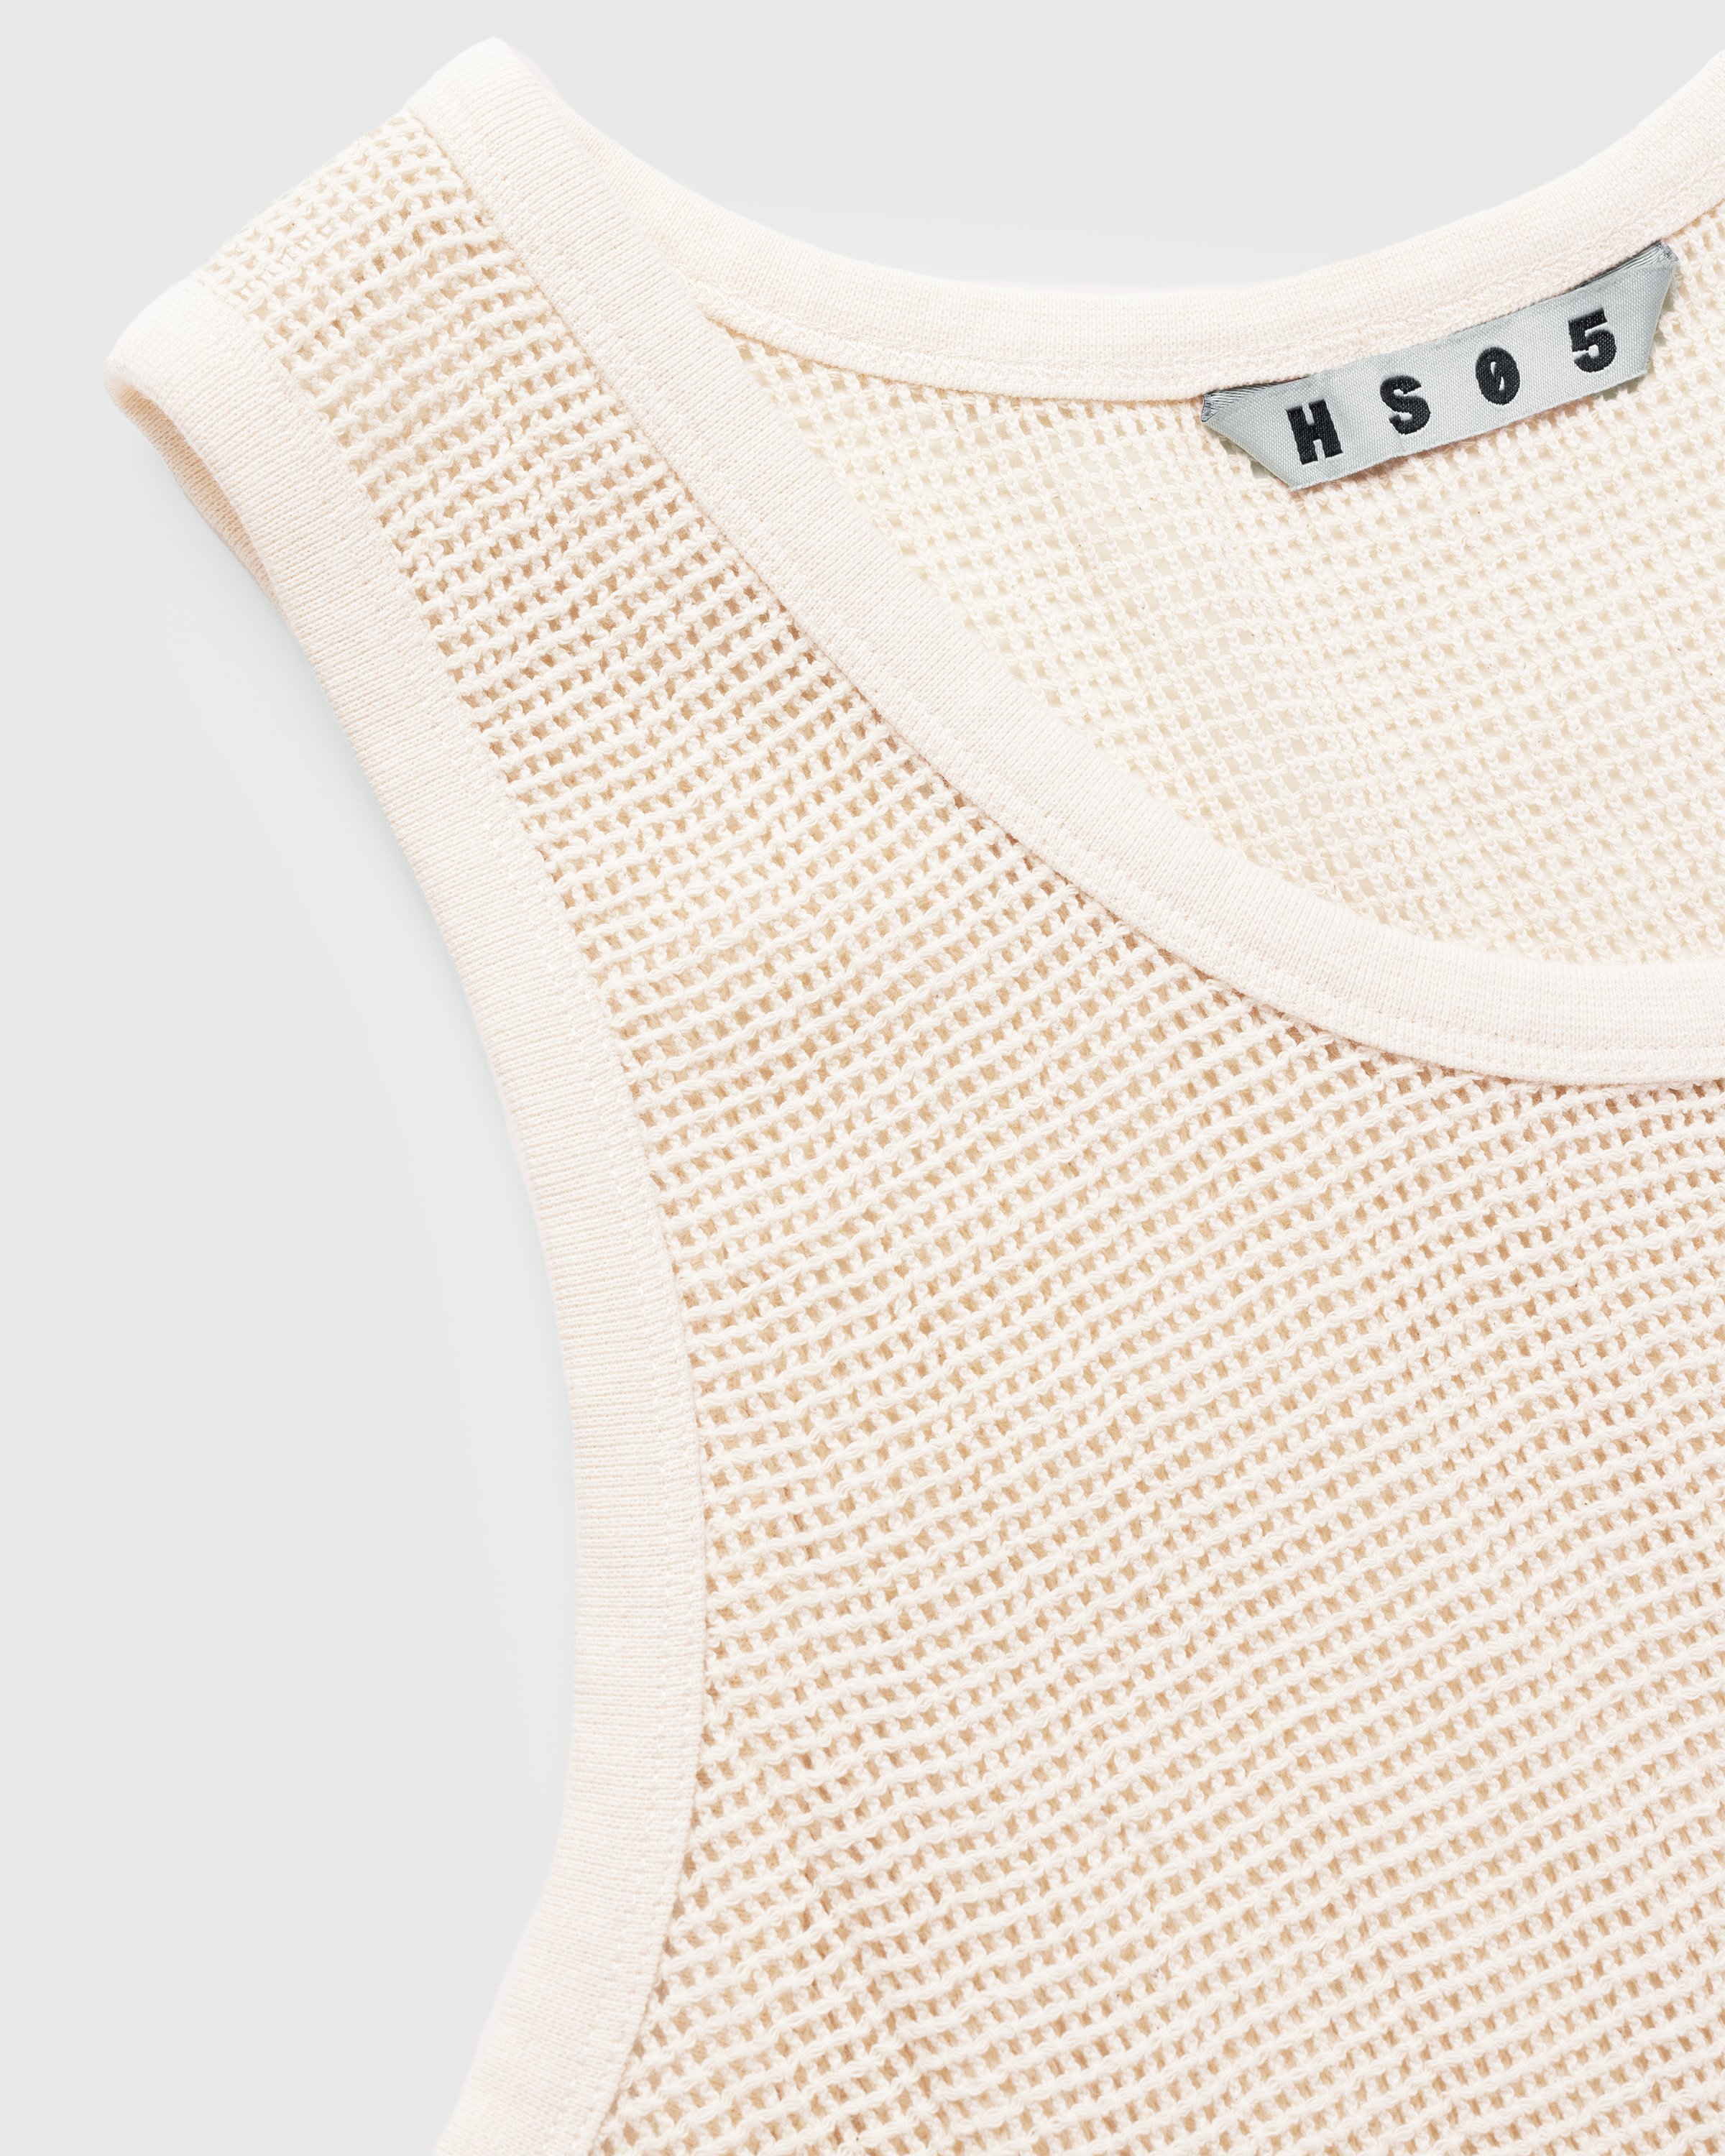 Highsnobiety HS05 - Pigment Dyed Cotton Mesh Tank Top - Clothing -  - Image 7